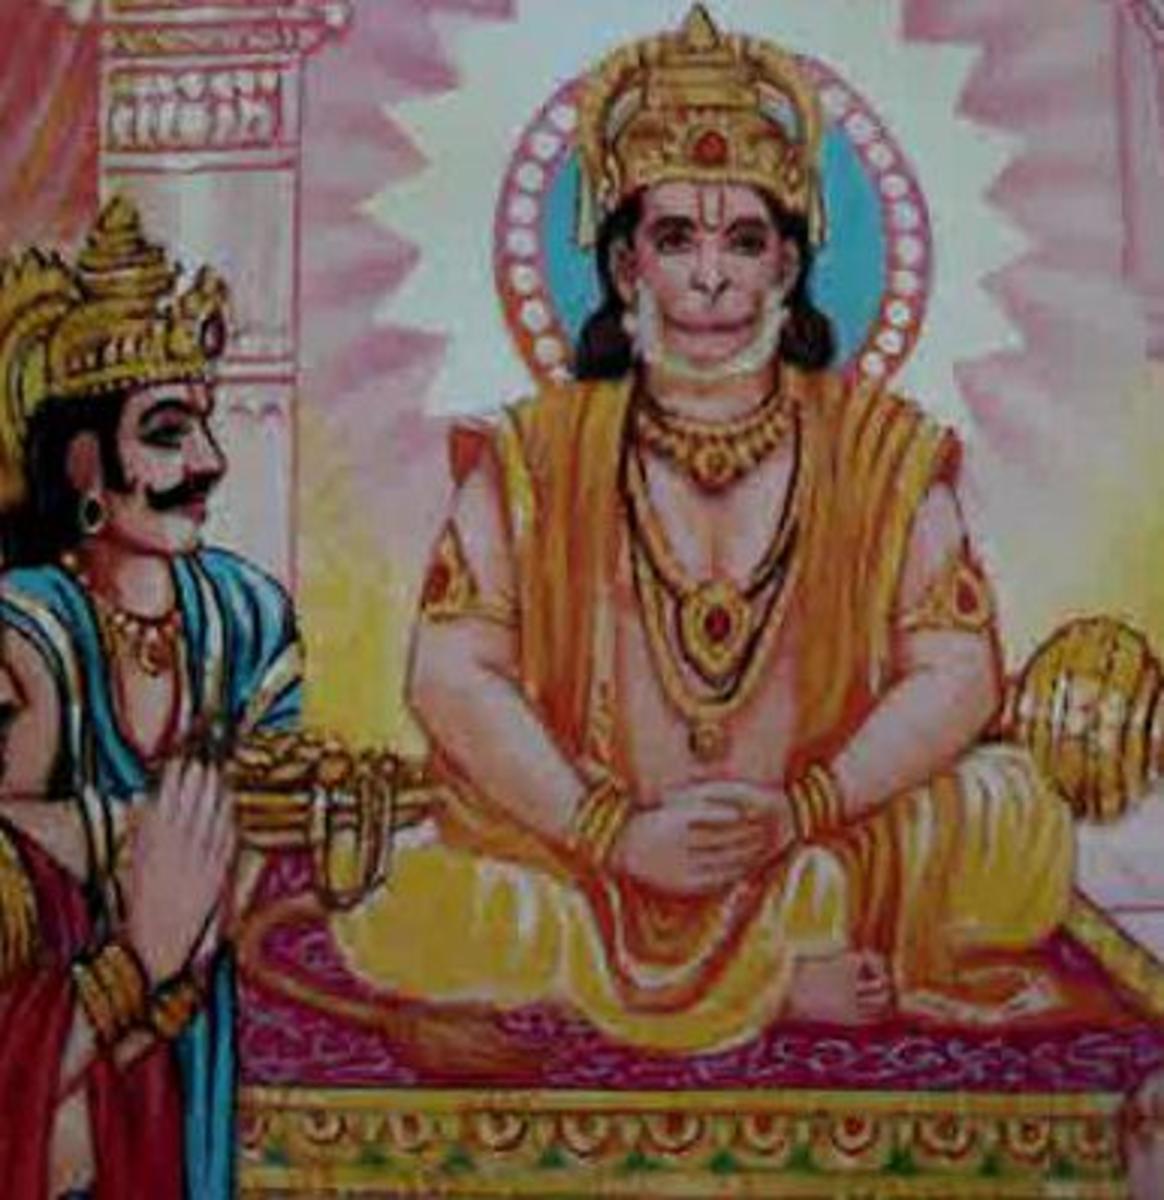 Picture depicting verse 17 of the Hanuman Chalisa